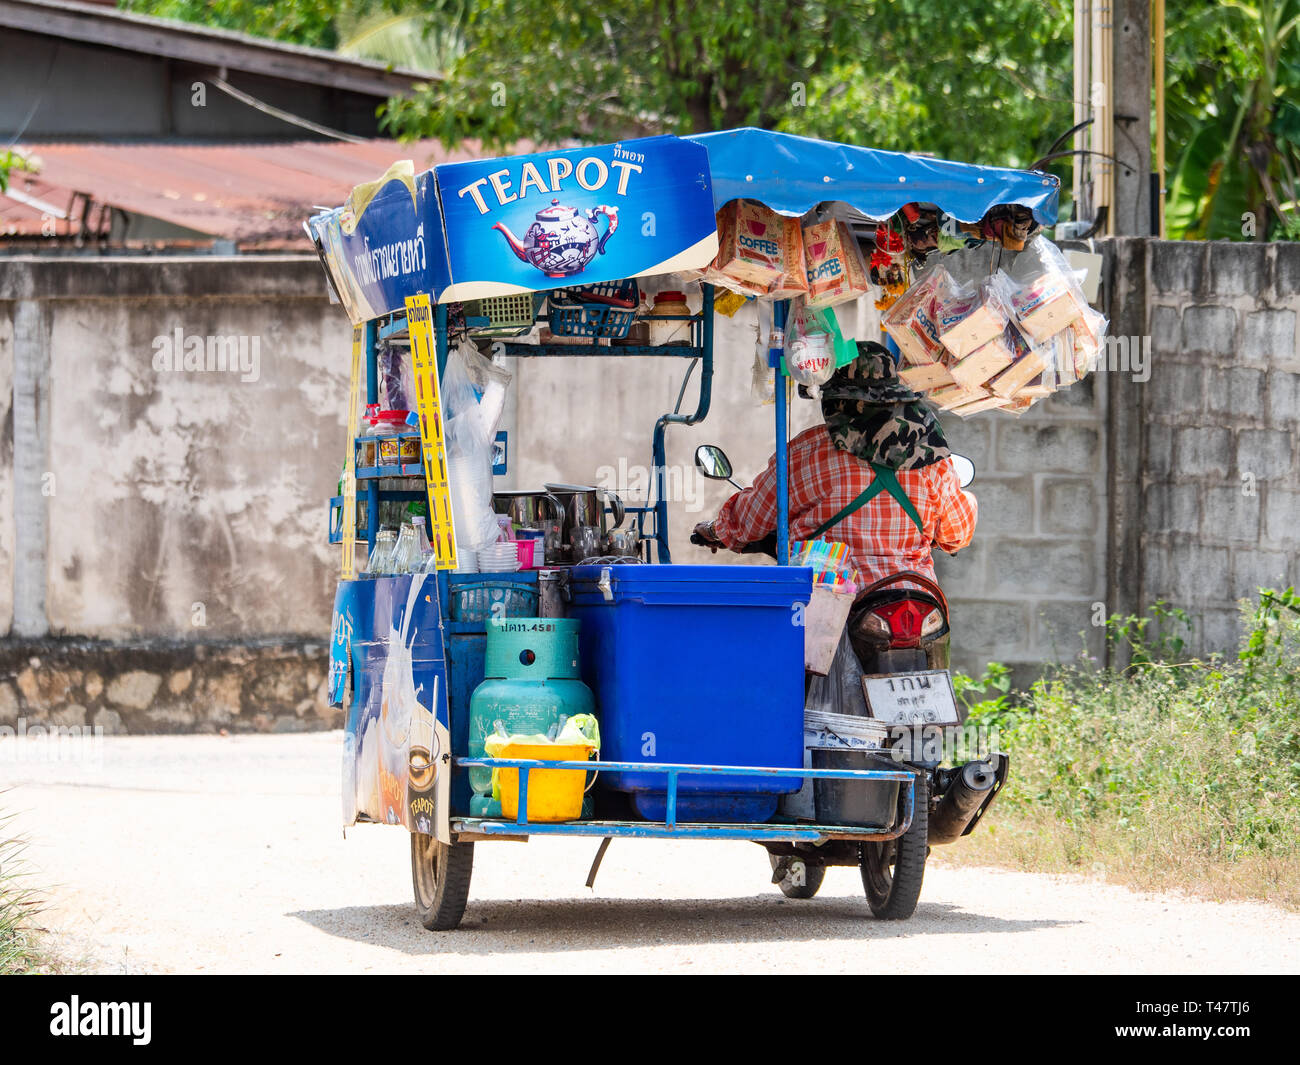 Rear view of street vendor on a motorbike with sidecar, selling tea, coffee and other refreshments at Huai Yai, a village in the Chonburi Province of  Stock Photo